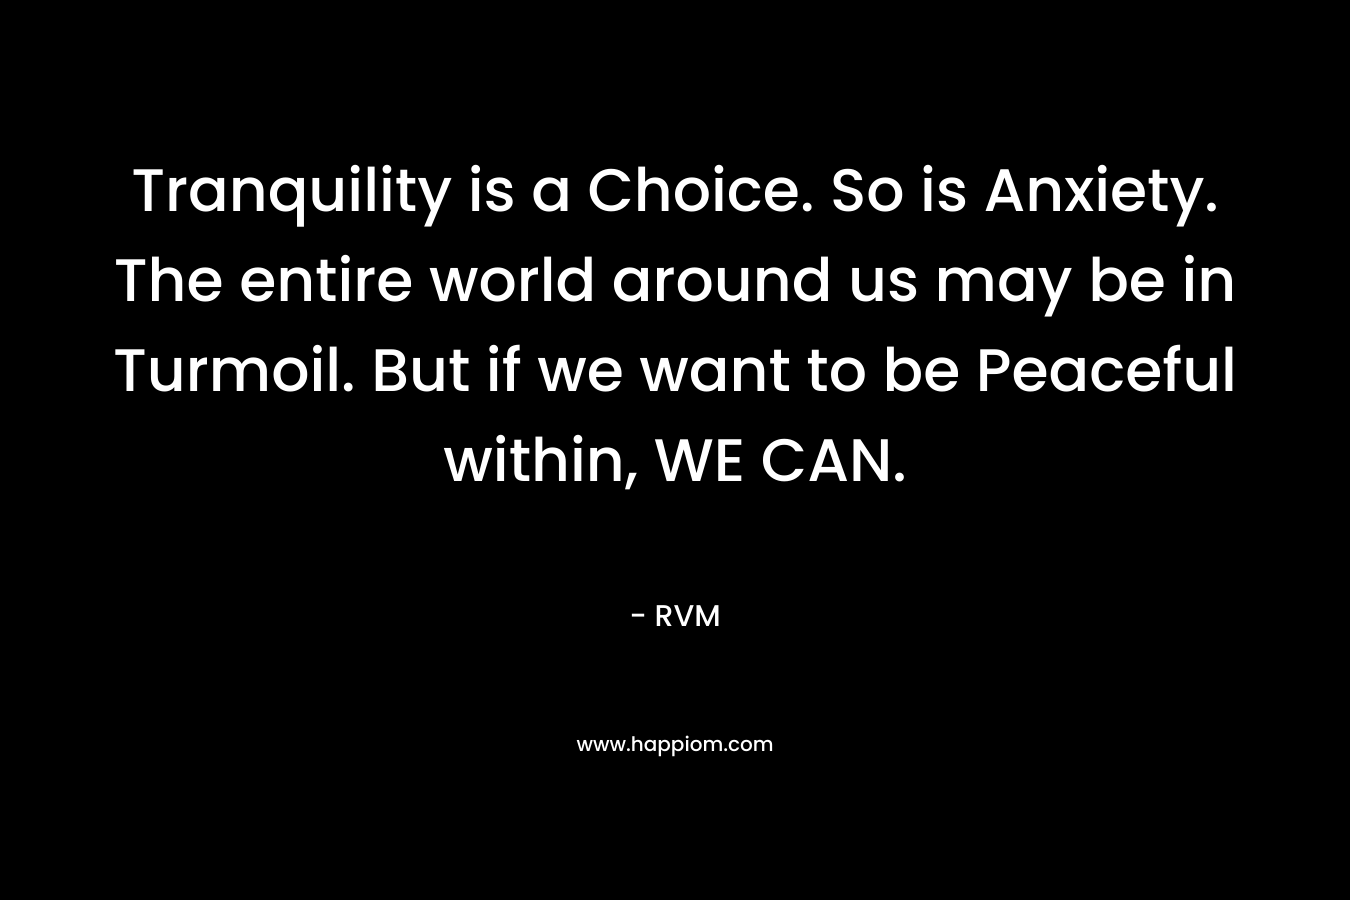 Tranquility is a Choice. So is Anxiety. The entire world around us may be in Turmoil. But if we want to be Peaceful within, WE CAN.